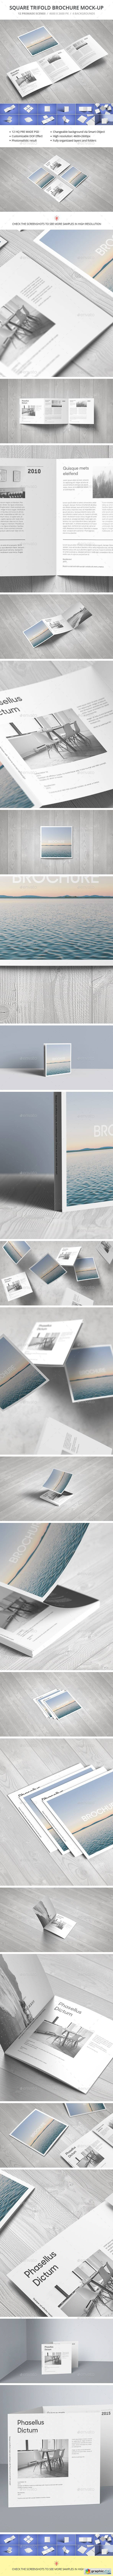 Square Trifold Brochure Mock-up